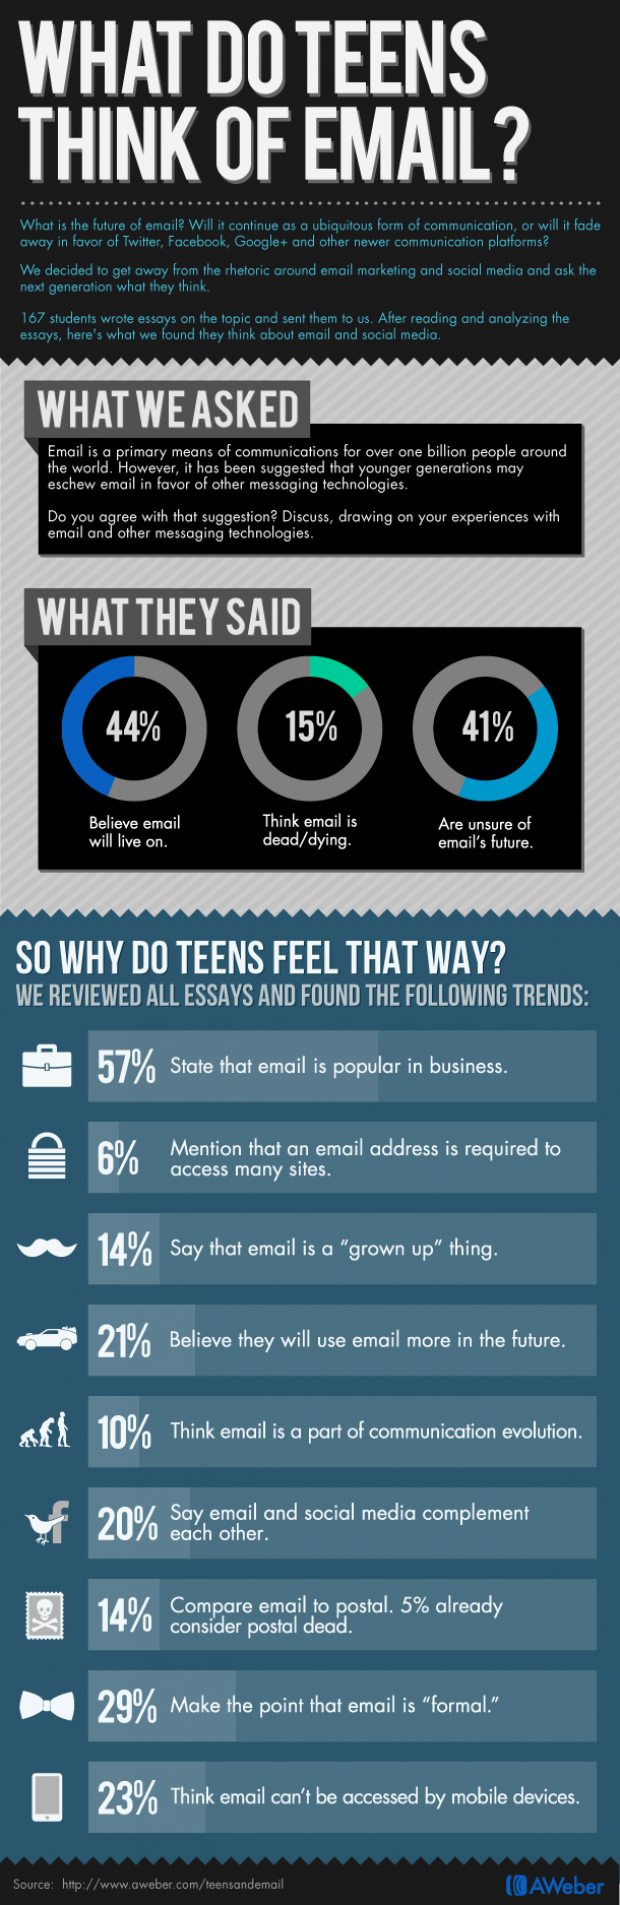 What Do Teens Think of Email? [Infographic]